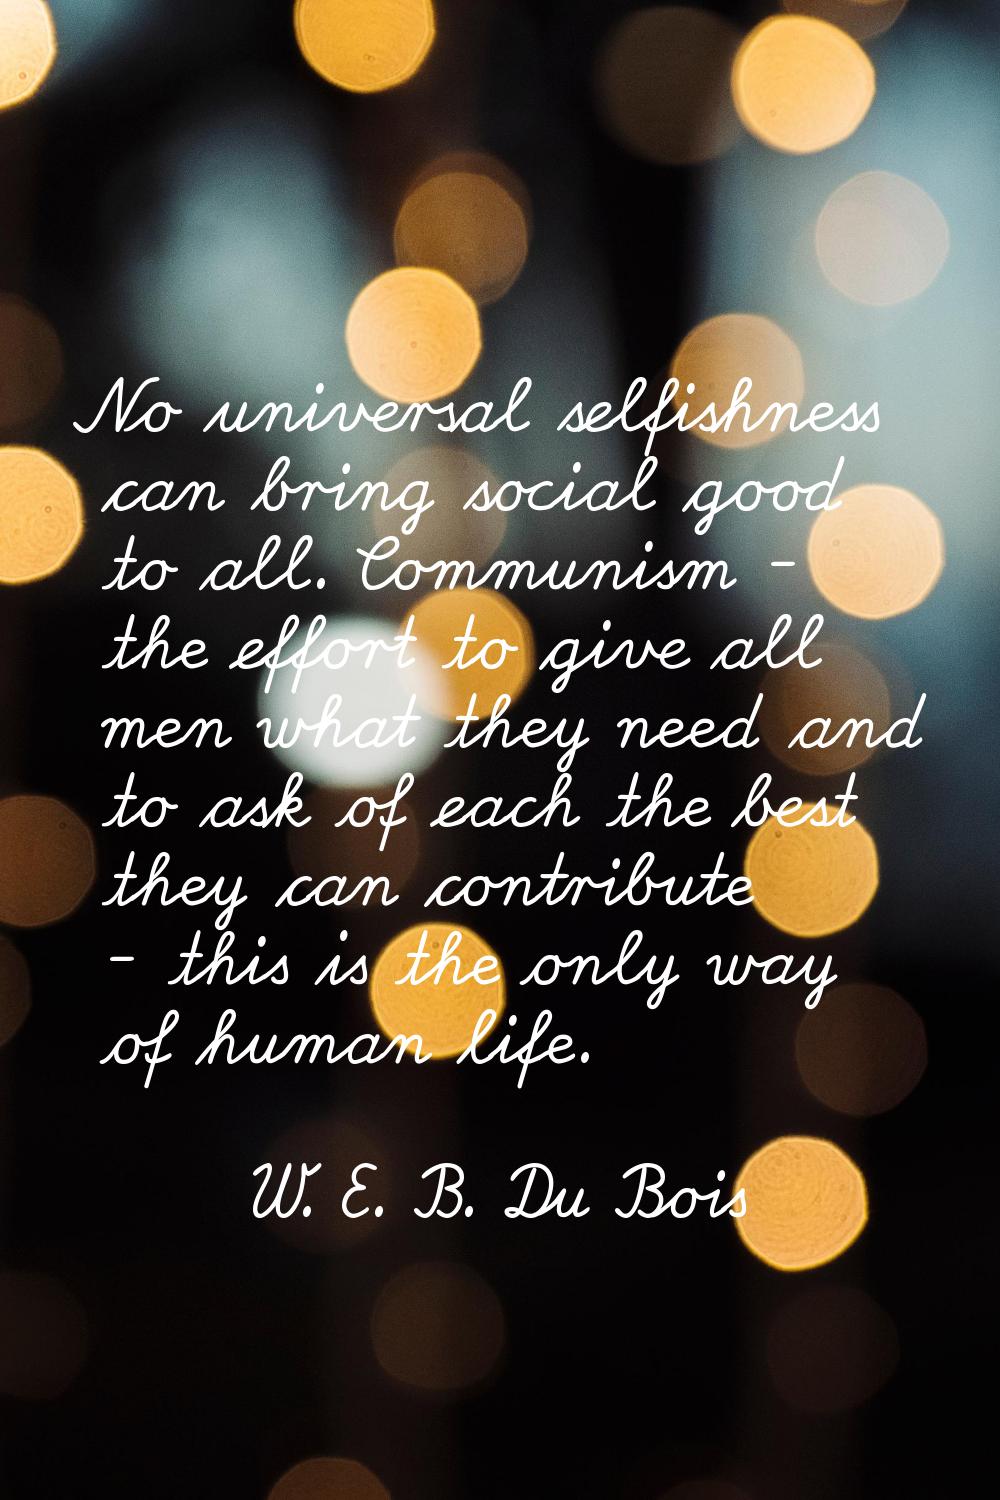 No universal selfishness can bring social good to all. Communism - the effort to give all men what 